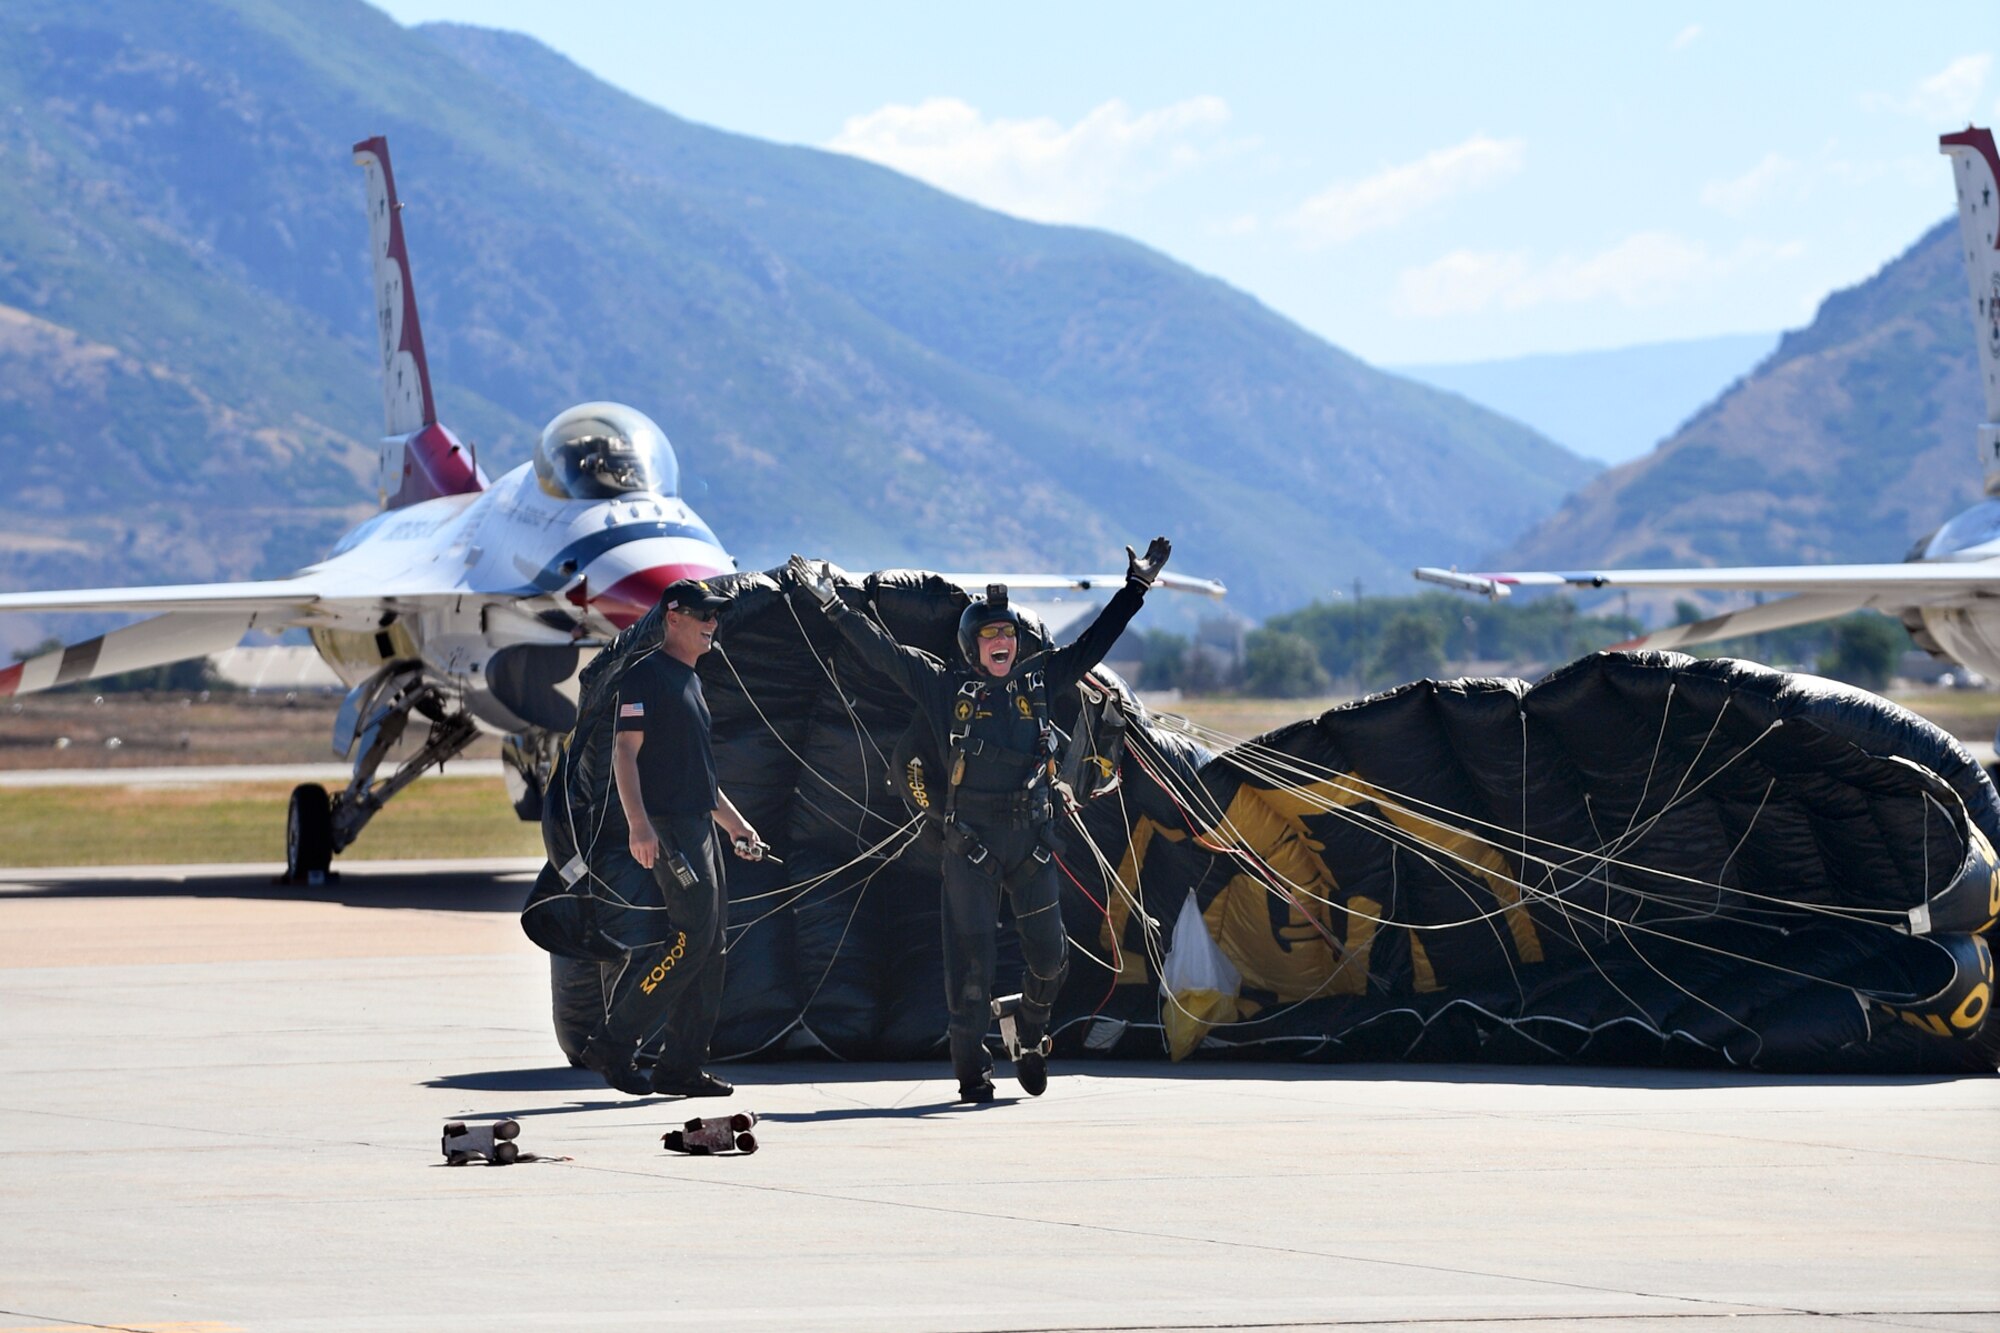 The U.S. Special Operations Command The Para-Commandos parachute demonstration team member lands on the ramp during the Warriors Over the Wasatch Air and Space Show June 24, 2018, at Hill Air Force Base, Utah. The Para-Commandos are comprised of active duty special operators, such as Army Special Forces, Army Rangers, Navy SEALs, Air Force Combat Controllers and Marine Raiders. (U.S. Air Force photo by Todd Cromar)